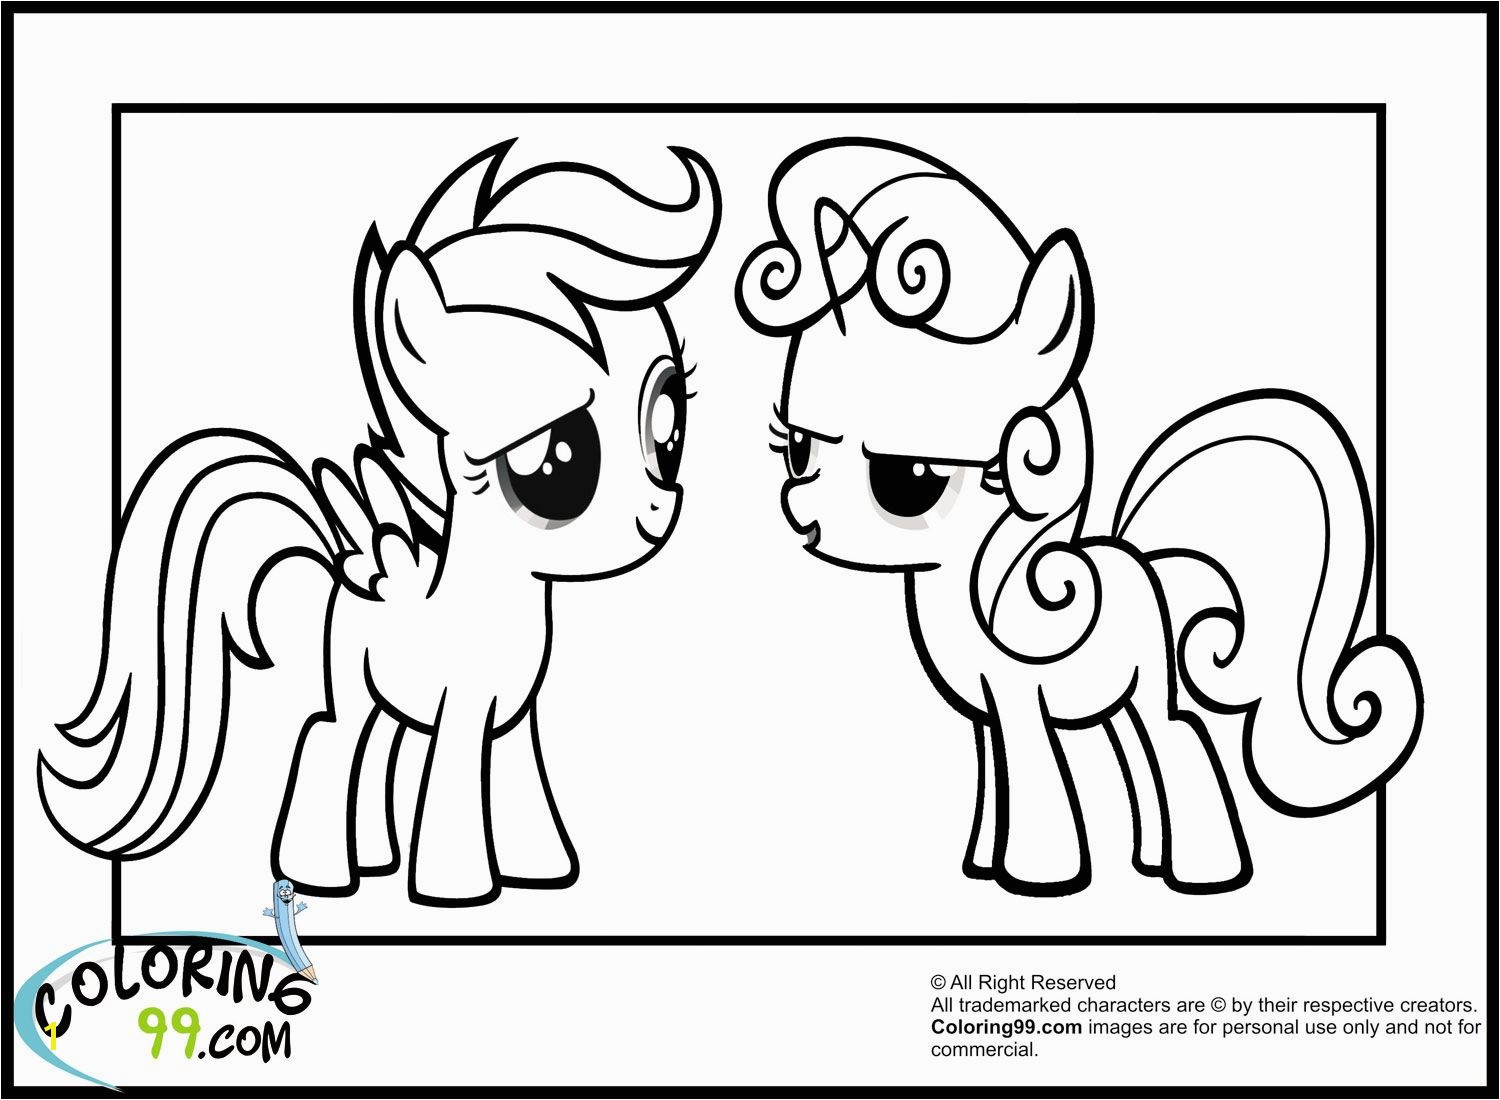 Scootaloo Coloring Page Mlp Scootaloo and Sweetie Belle Coloring Pages 15001100